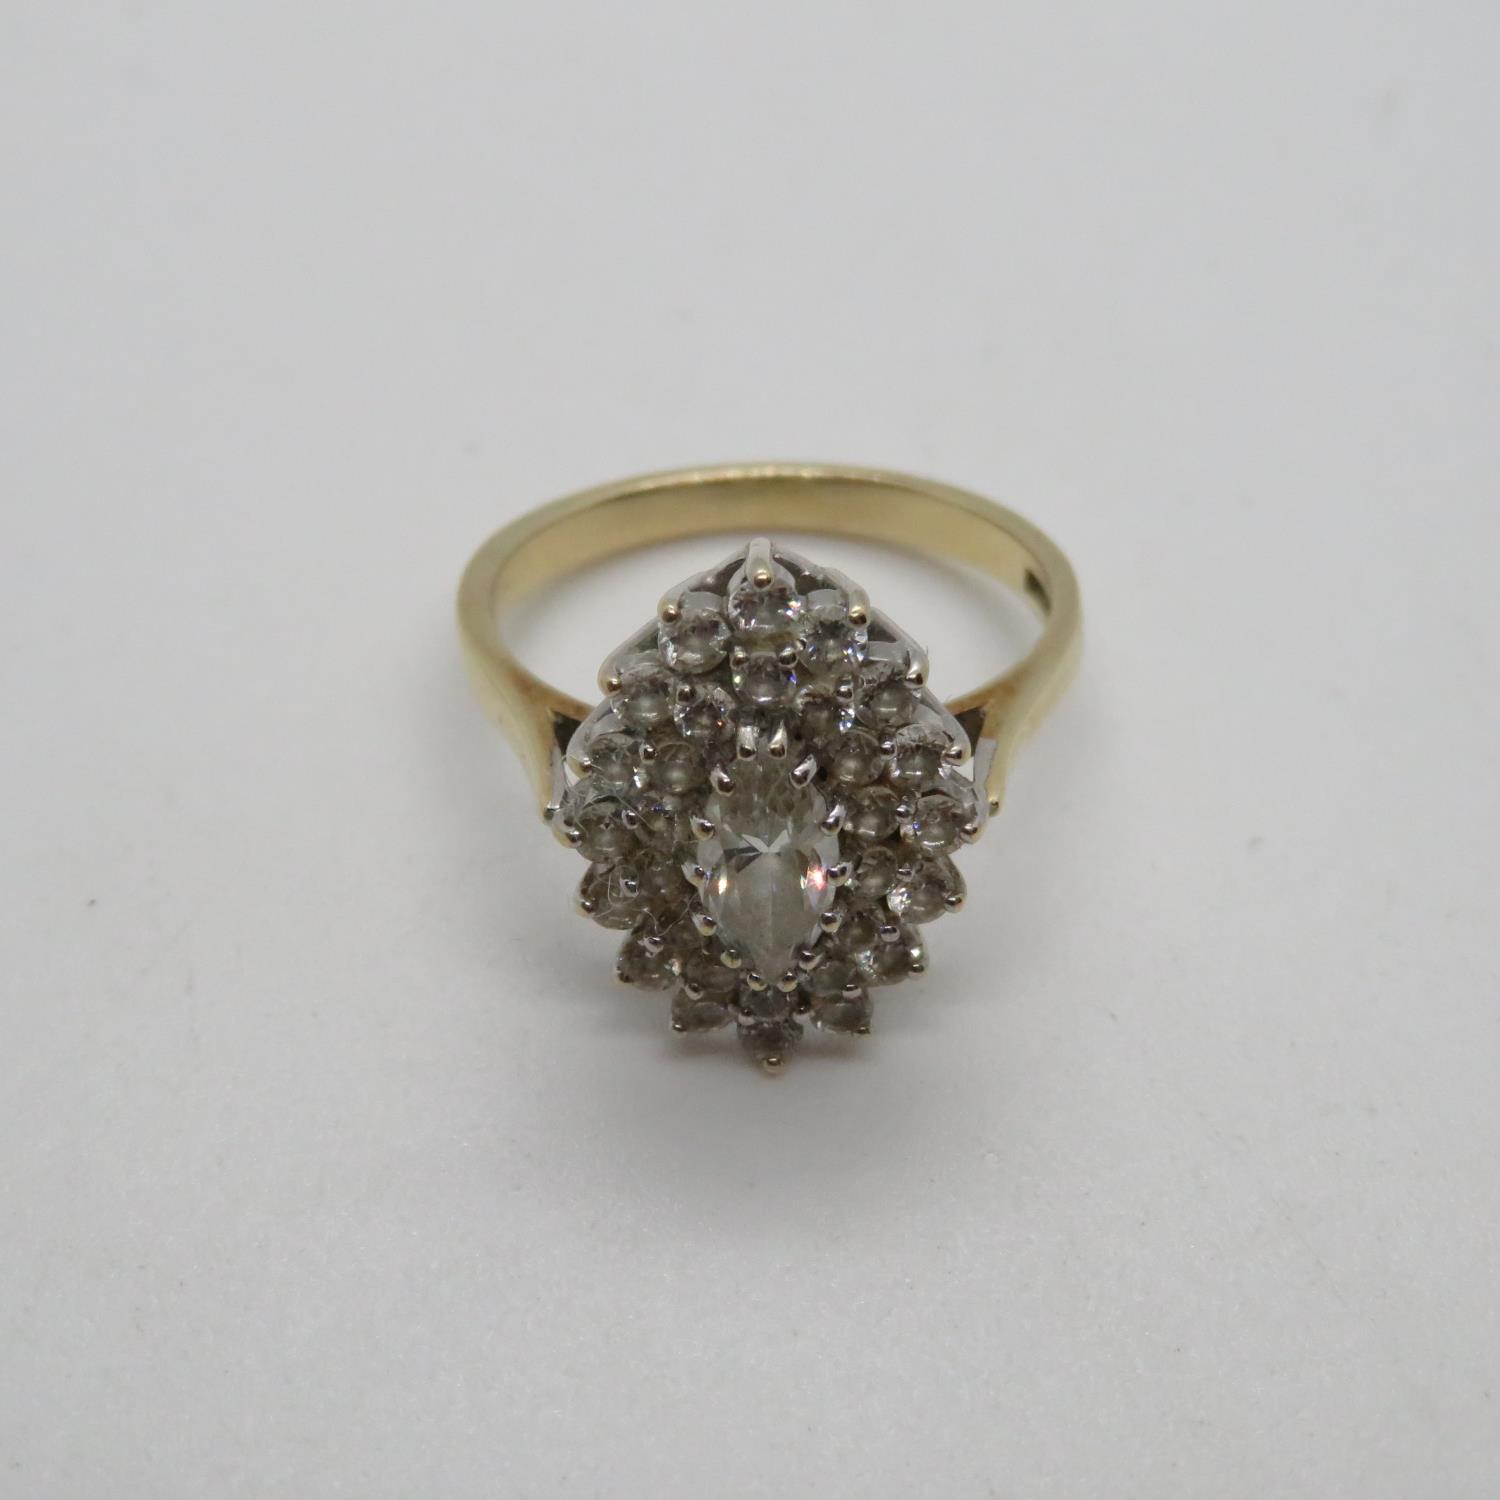 4g size P gold and CZ ring